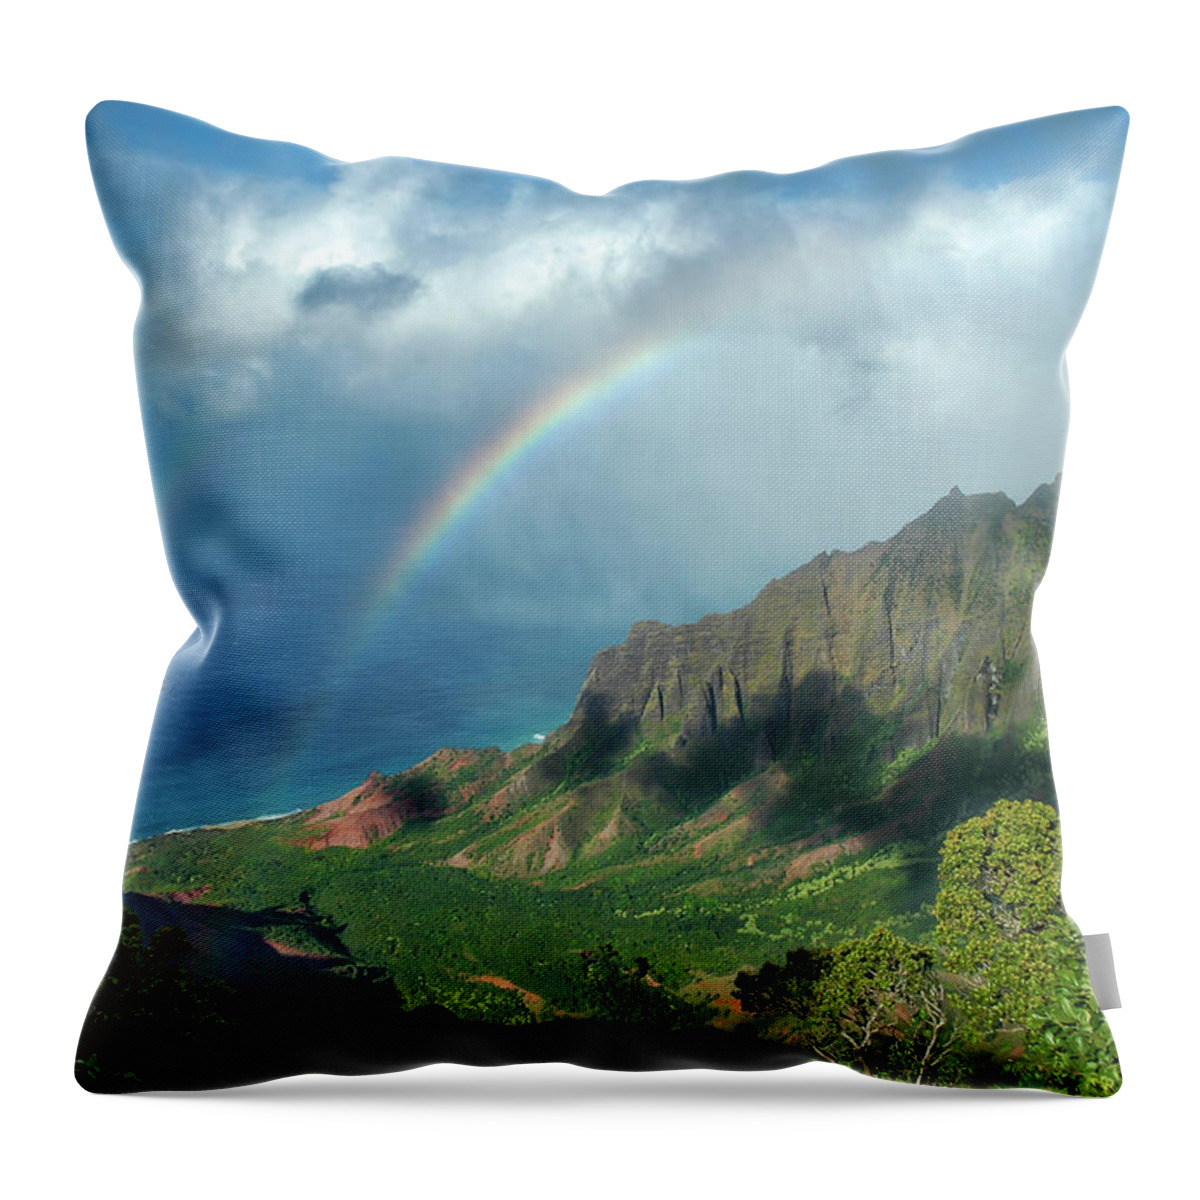 Landscape Throw Pillow featuring the photograph Rainbow at Kalalau Valley by James Eddy